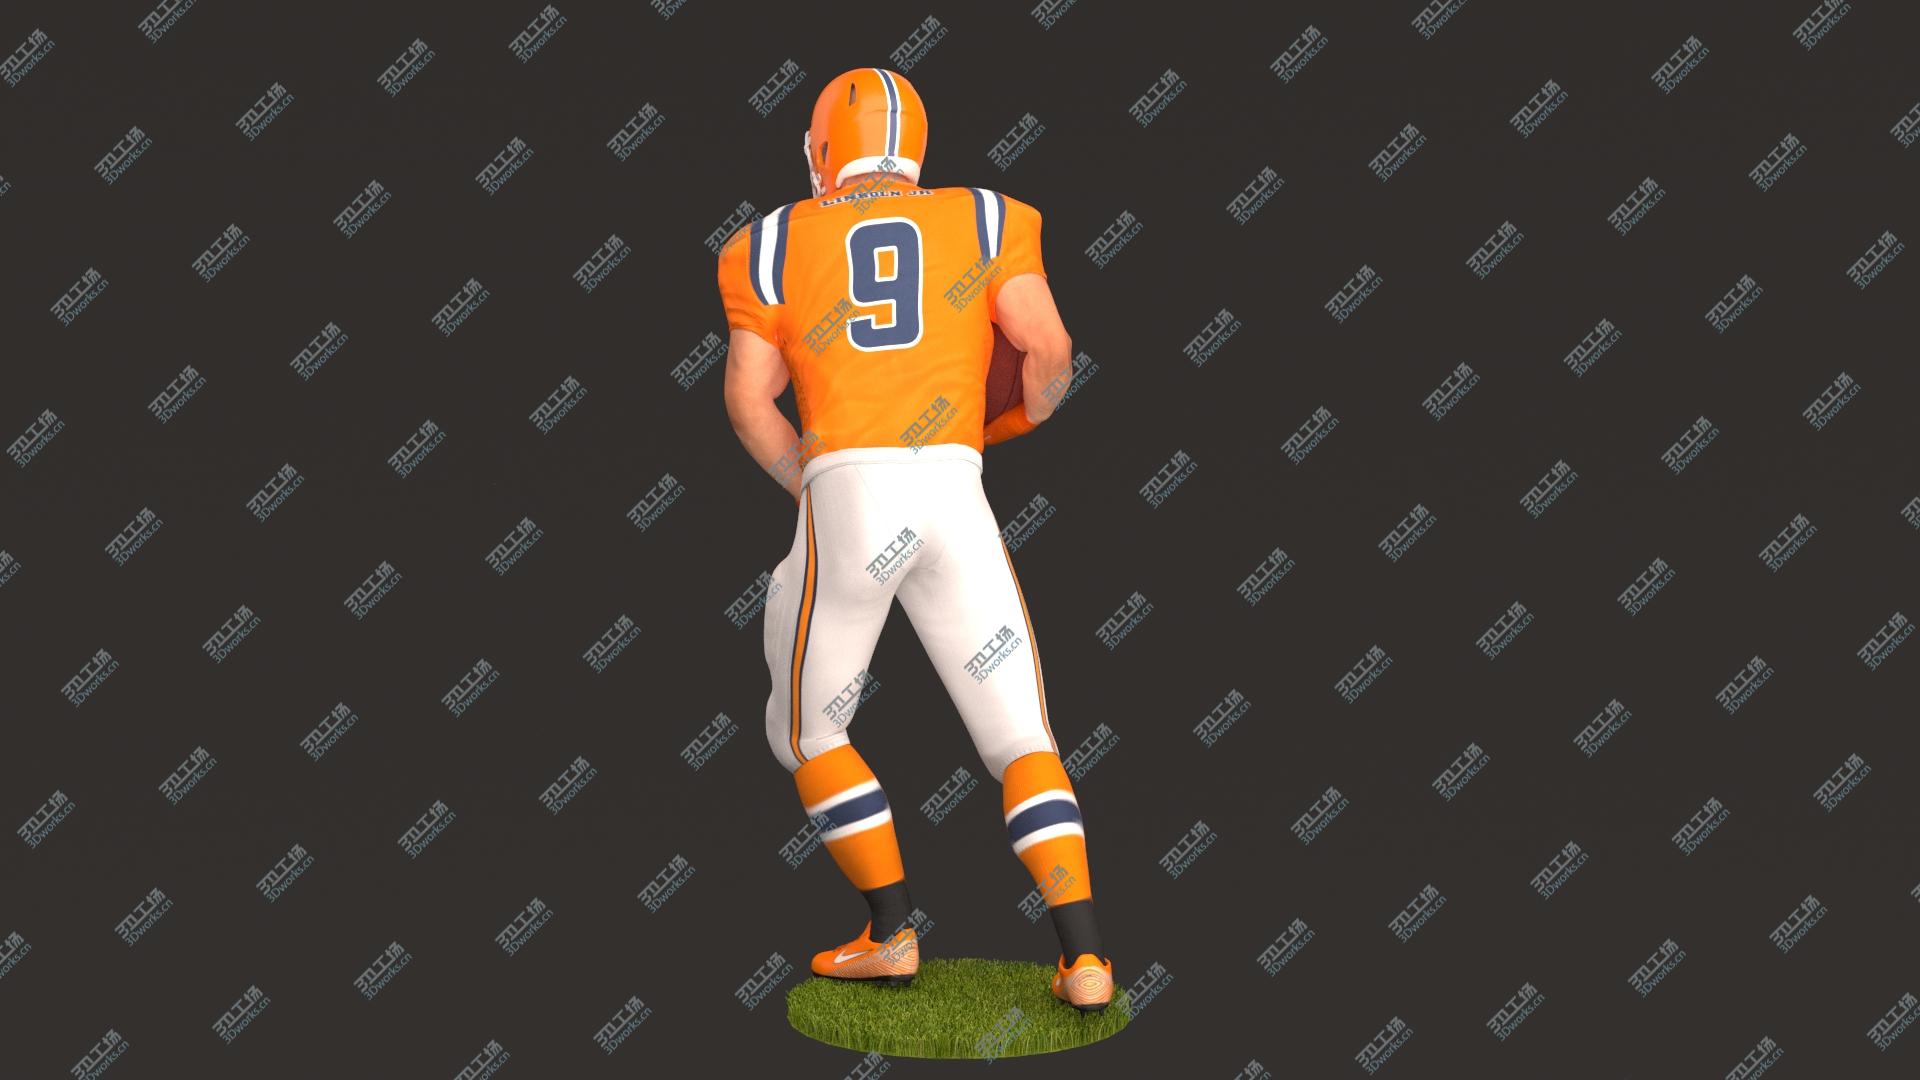 images/goods_img/20210313/3D American Football Player 2020 V6 Rigged/5.jpg